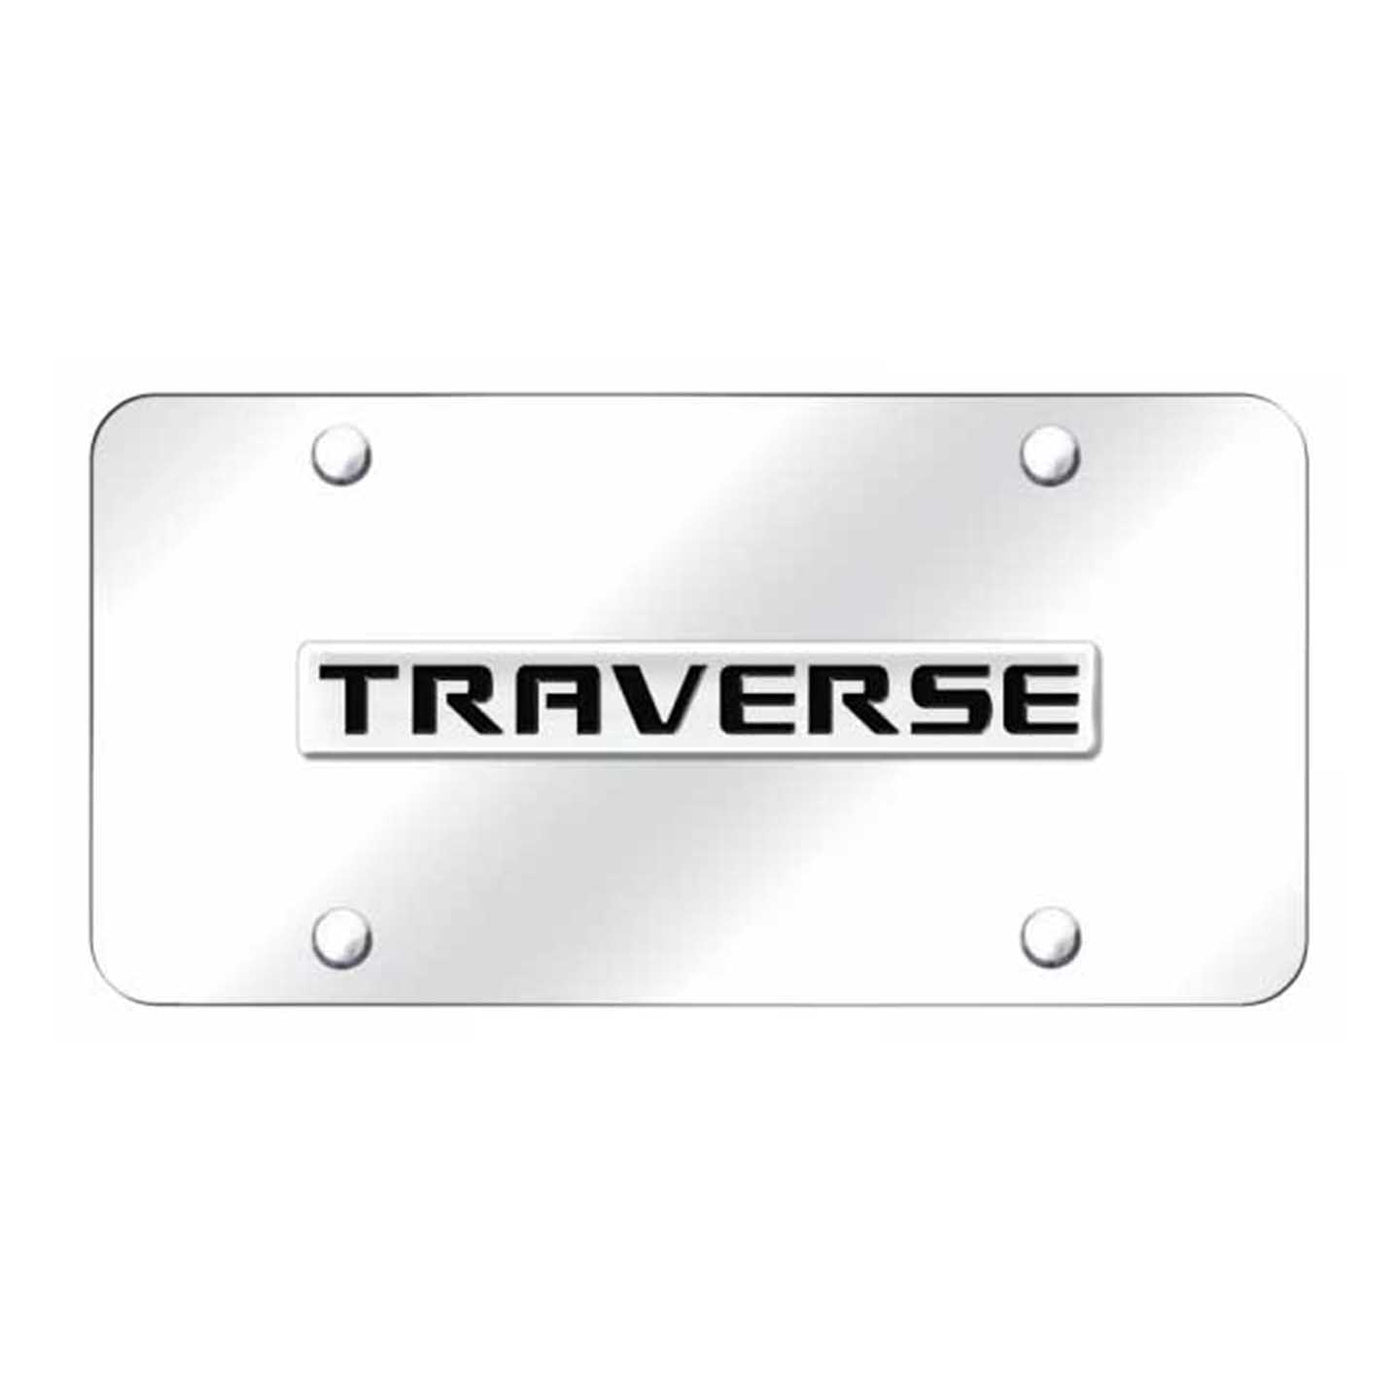 Traverse Name License Plate - Chrome on Mirrored